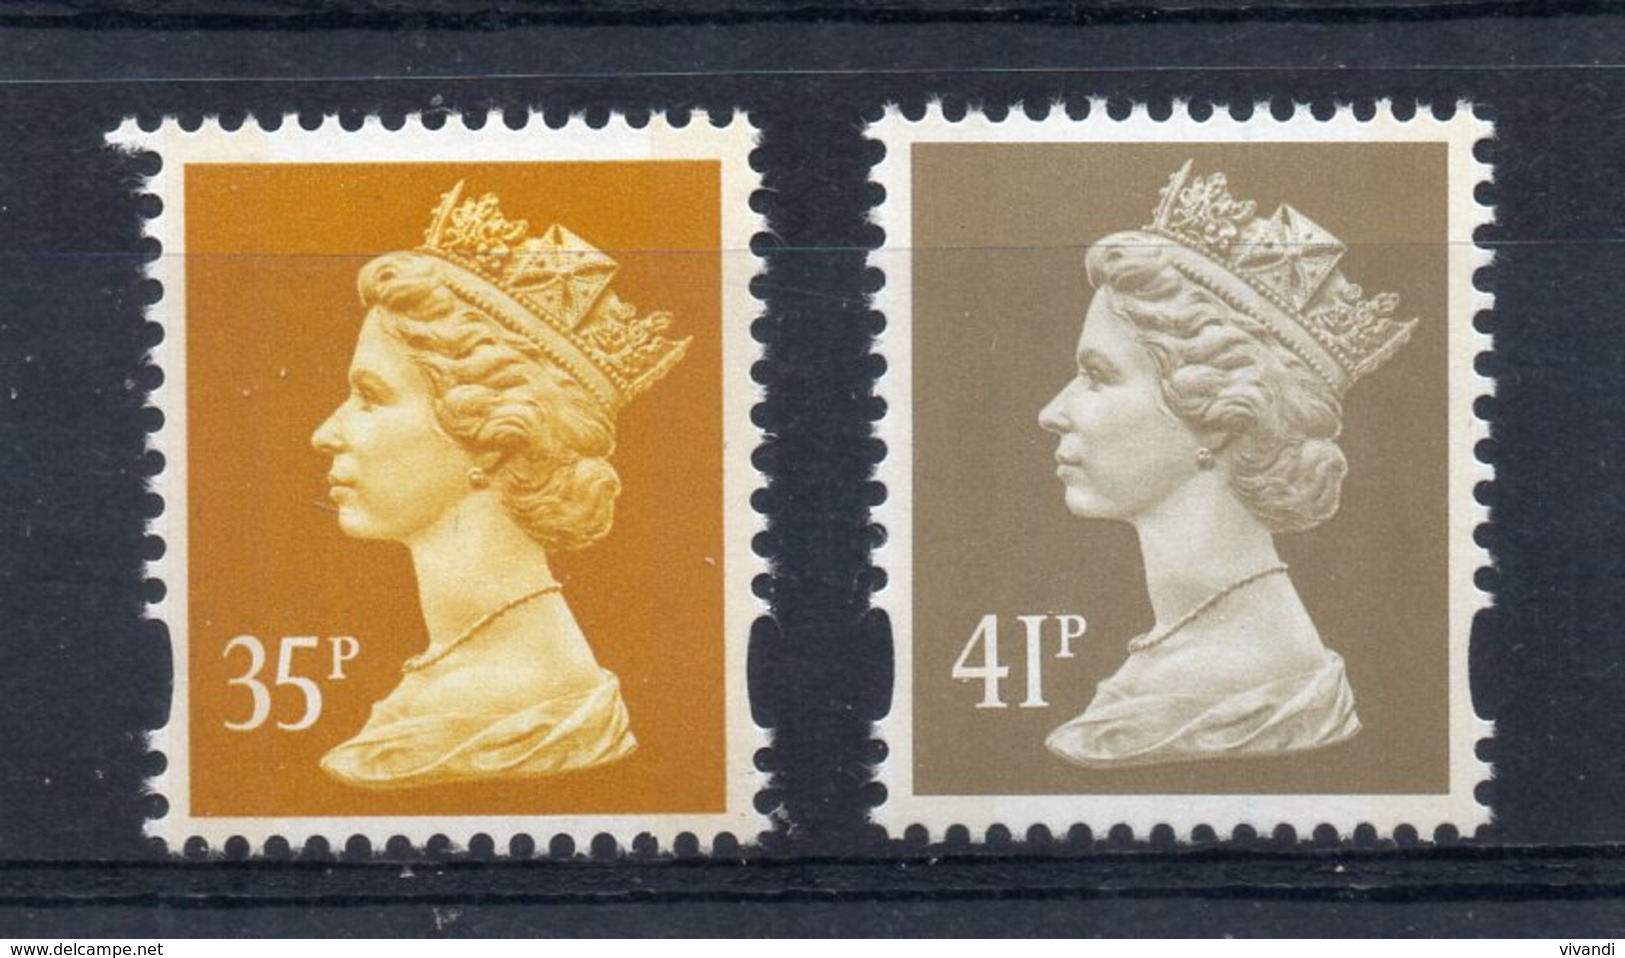 Great Britain - 1993 - Elliptical Perf Machins (Issued 01/11/93, Litho) - MNH - Nuovi